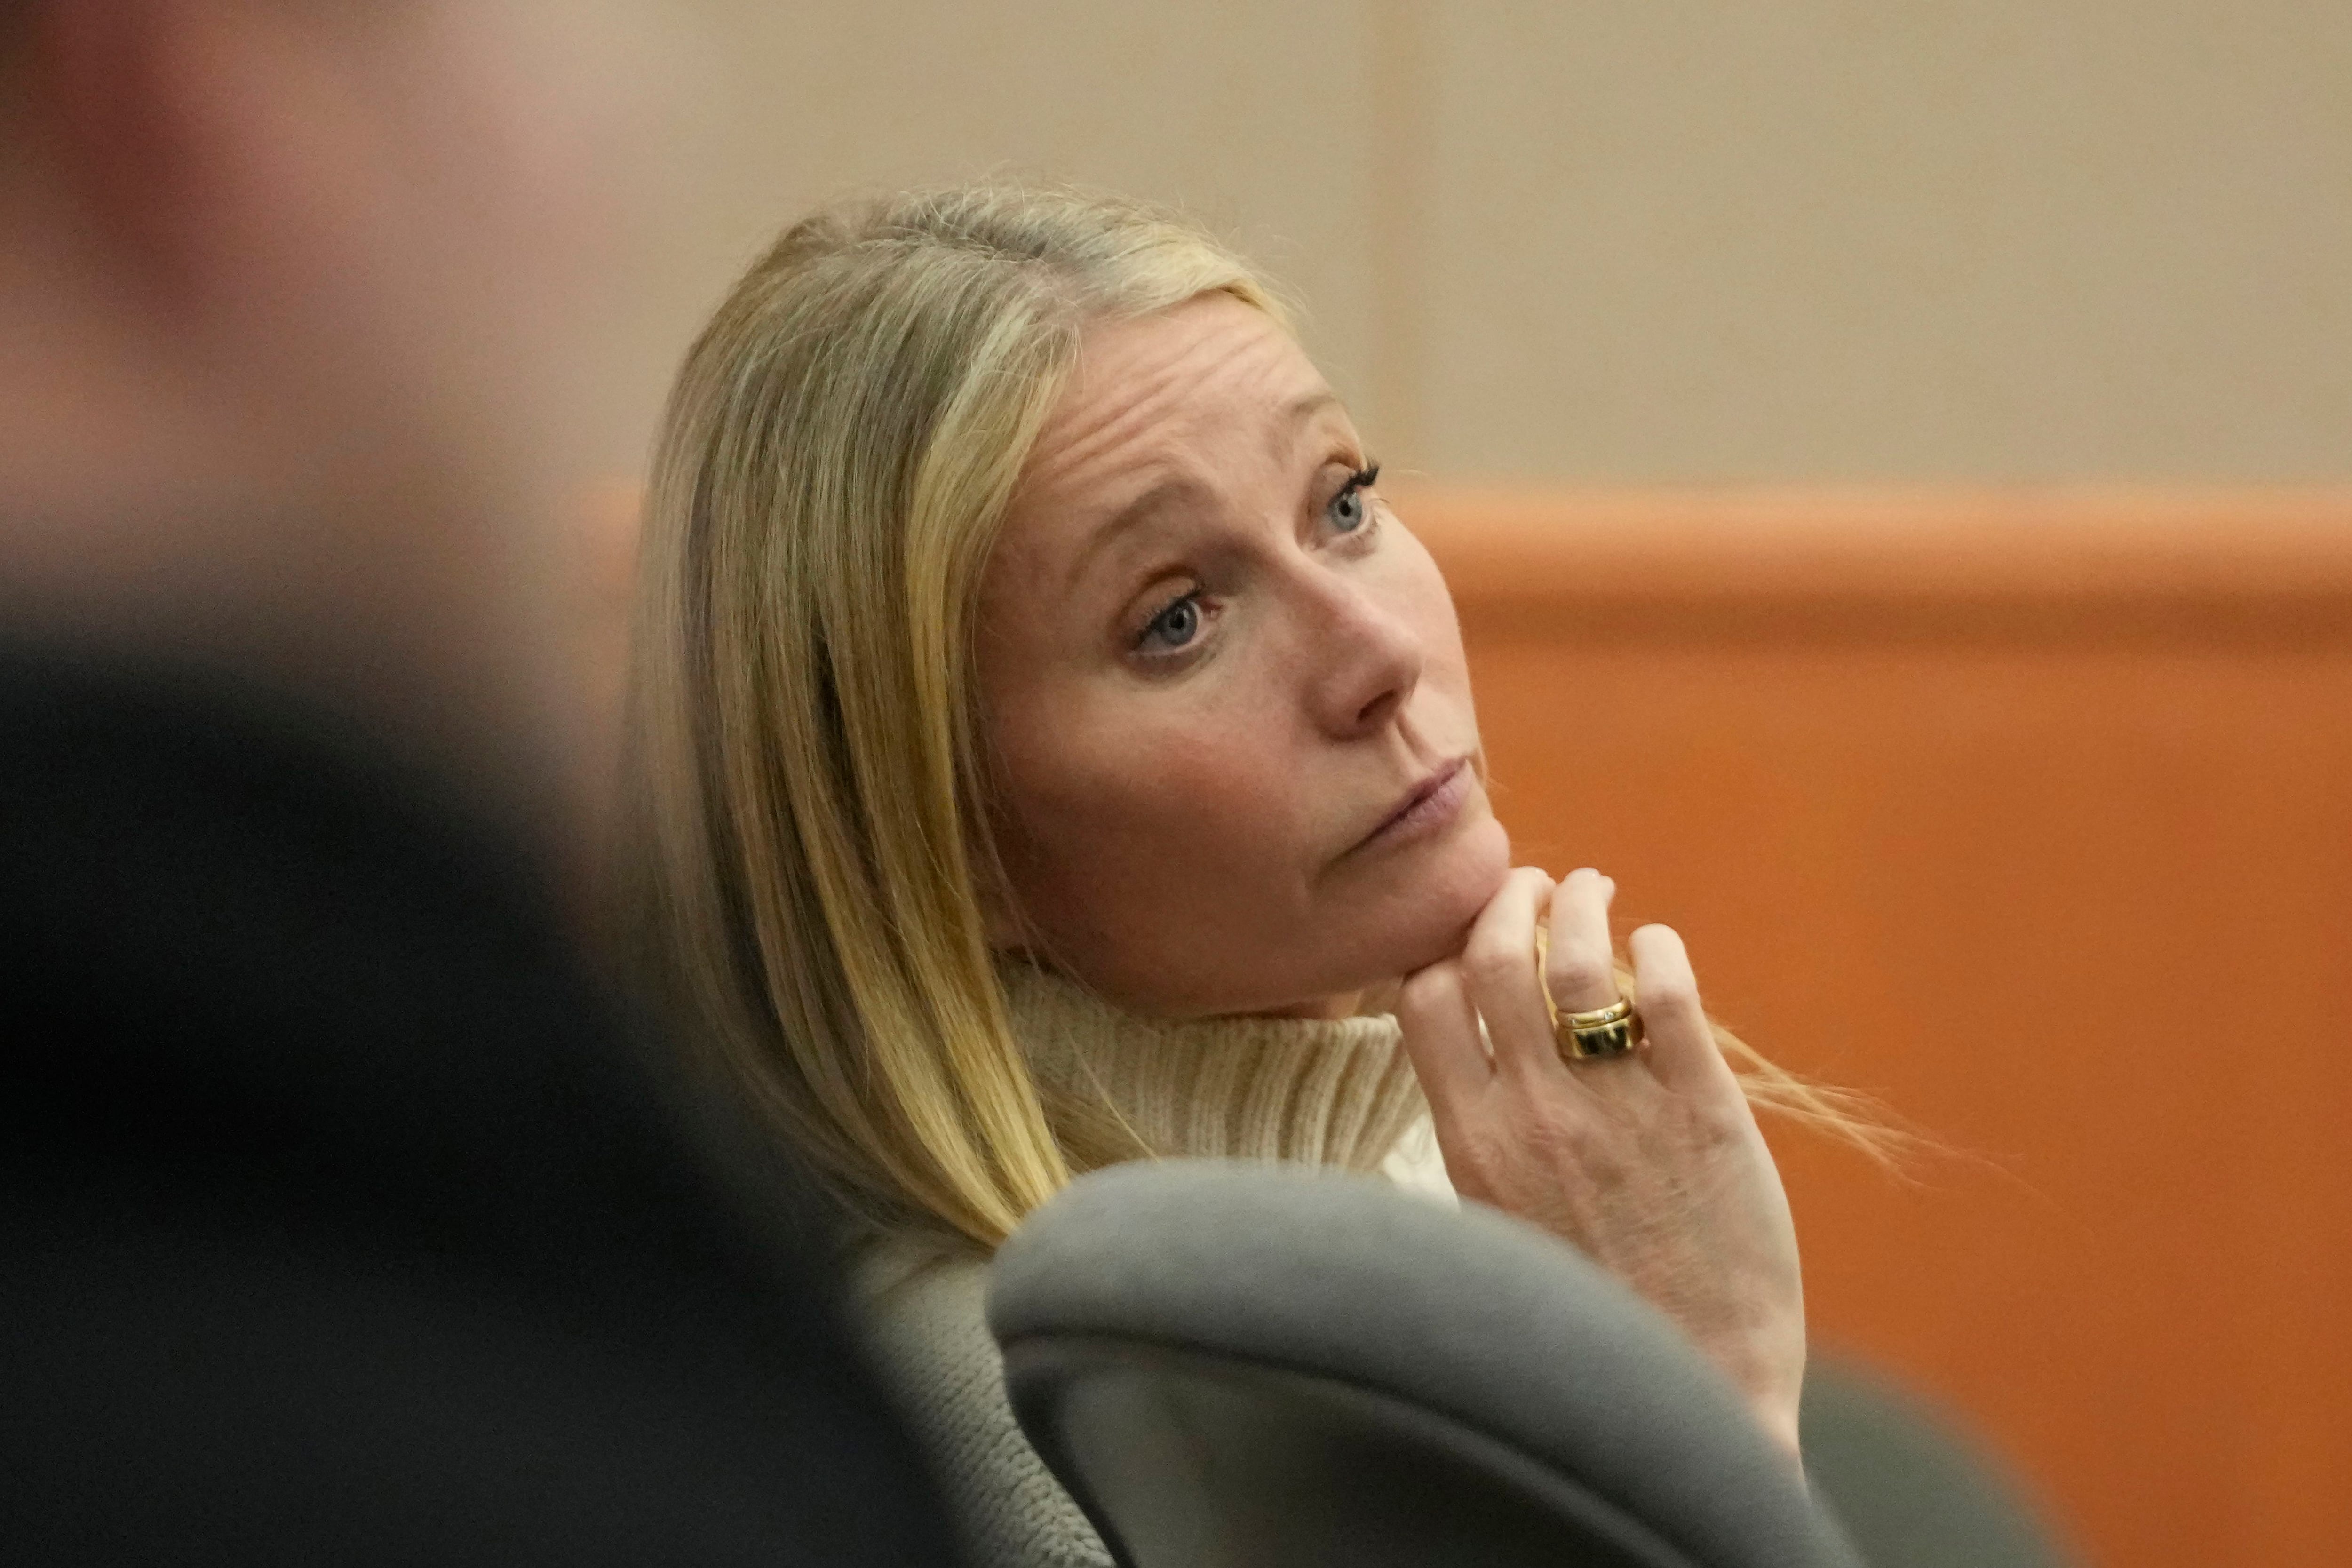 Doctors expected to testify in Gwyneth Paltrow’s ski trial